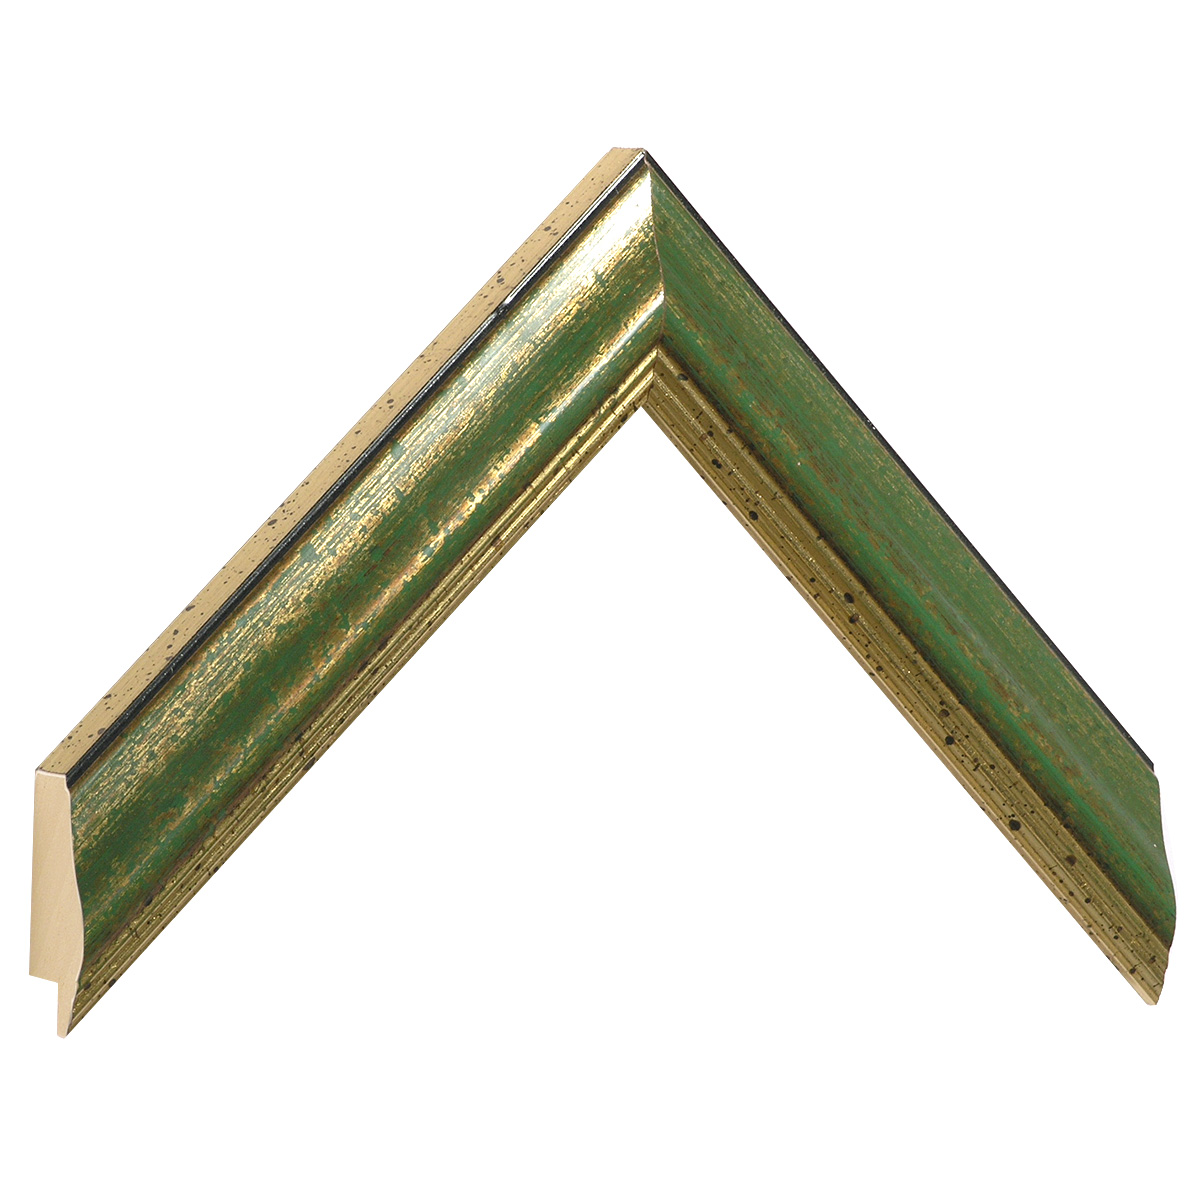 Moulding ayous width 30mm - distressed gold, green front - Sample